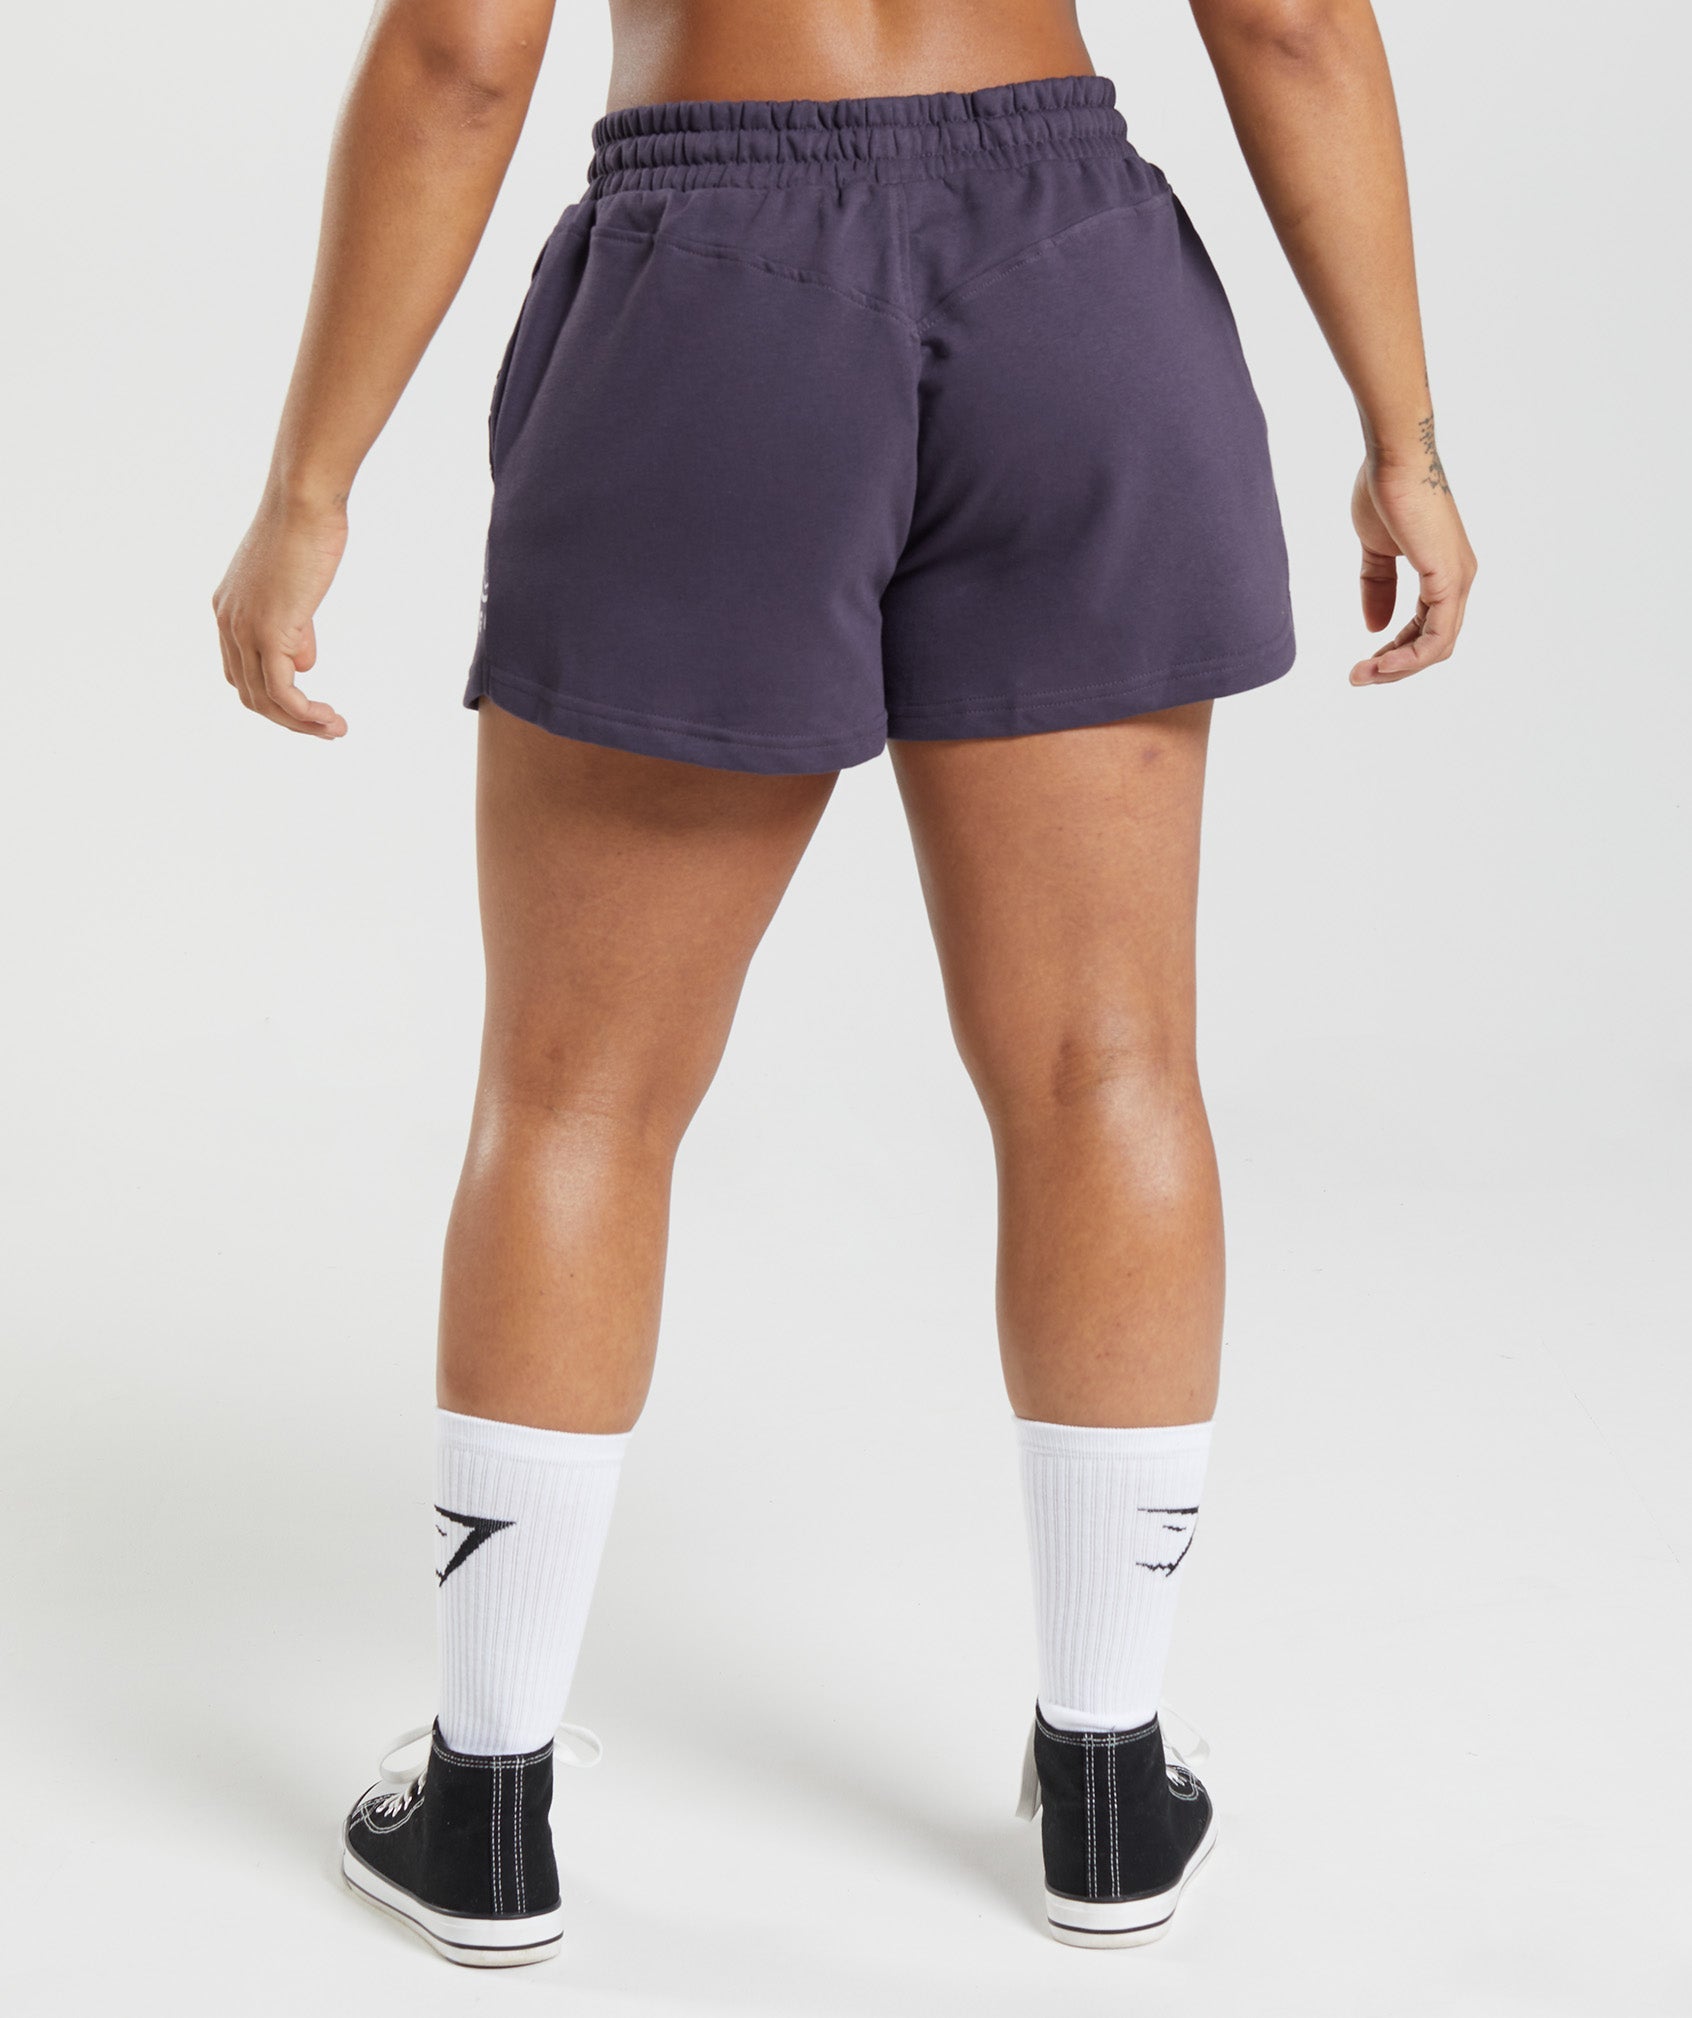 Legacy Shorts in Rich Purple - view 2